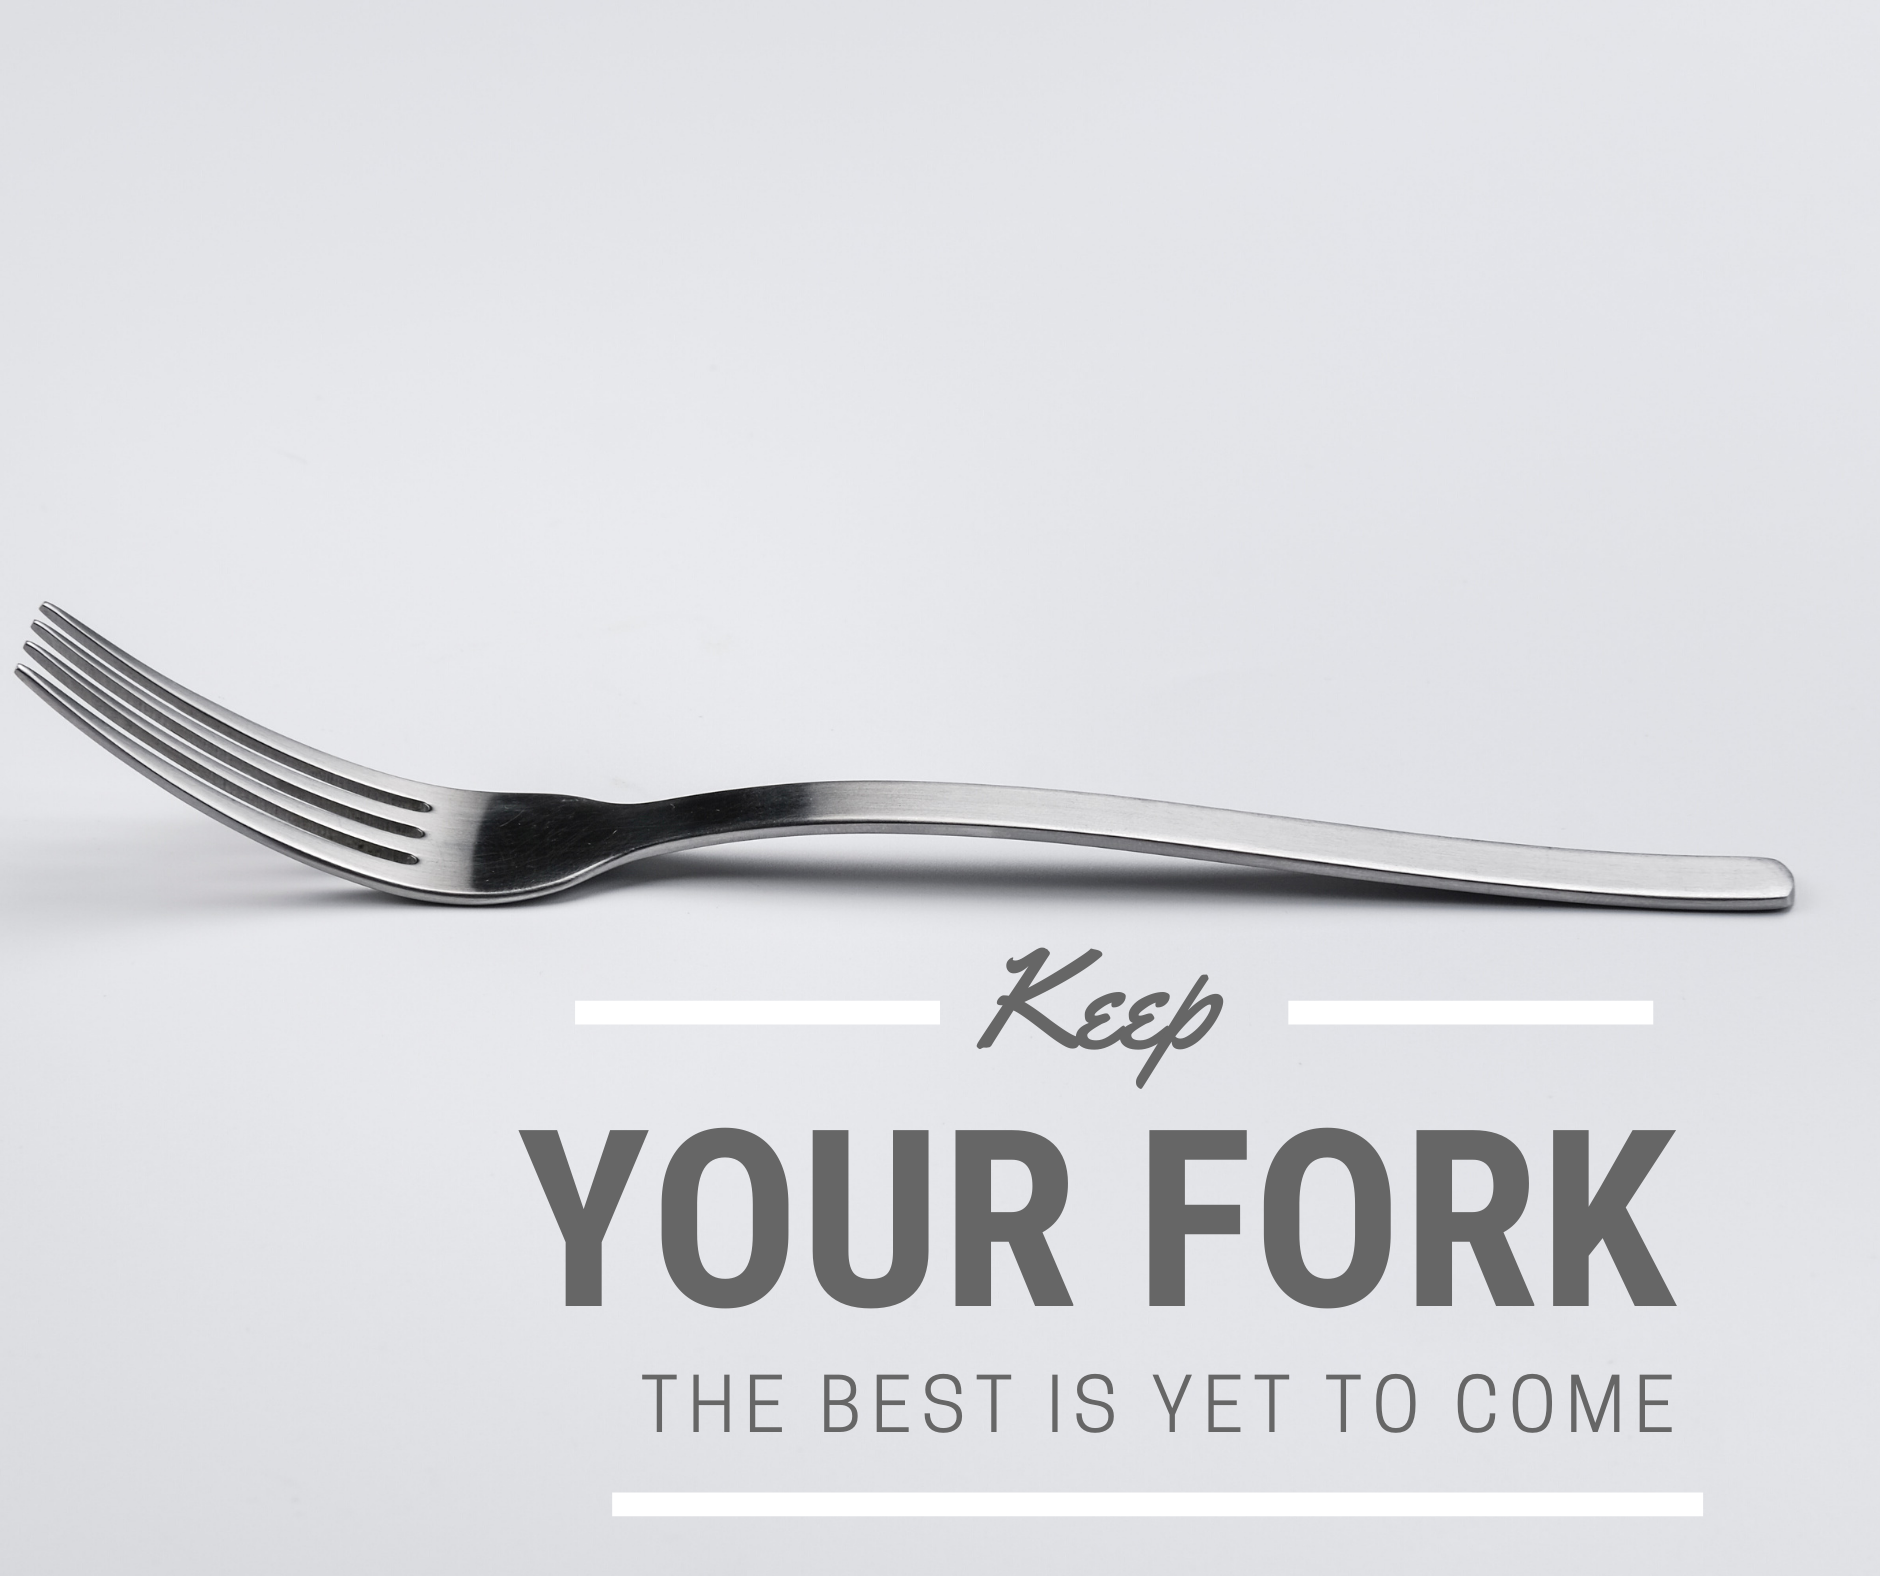 Keep Your Forks Rochester Christian Church